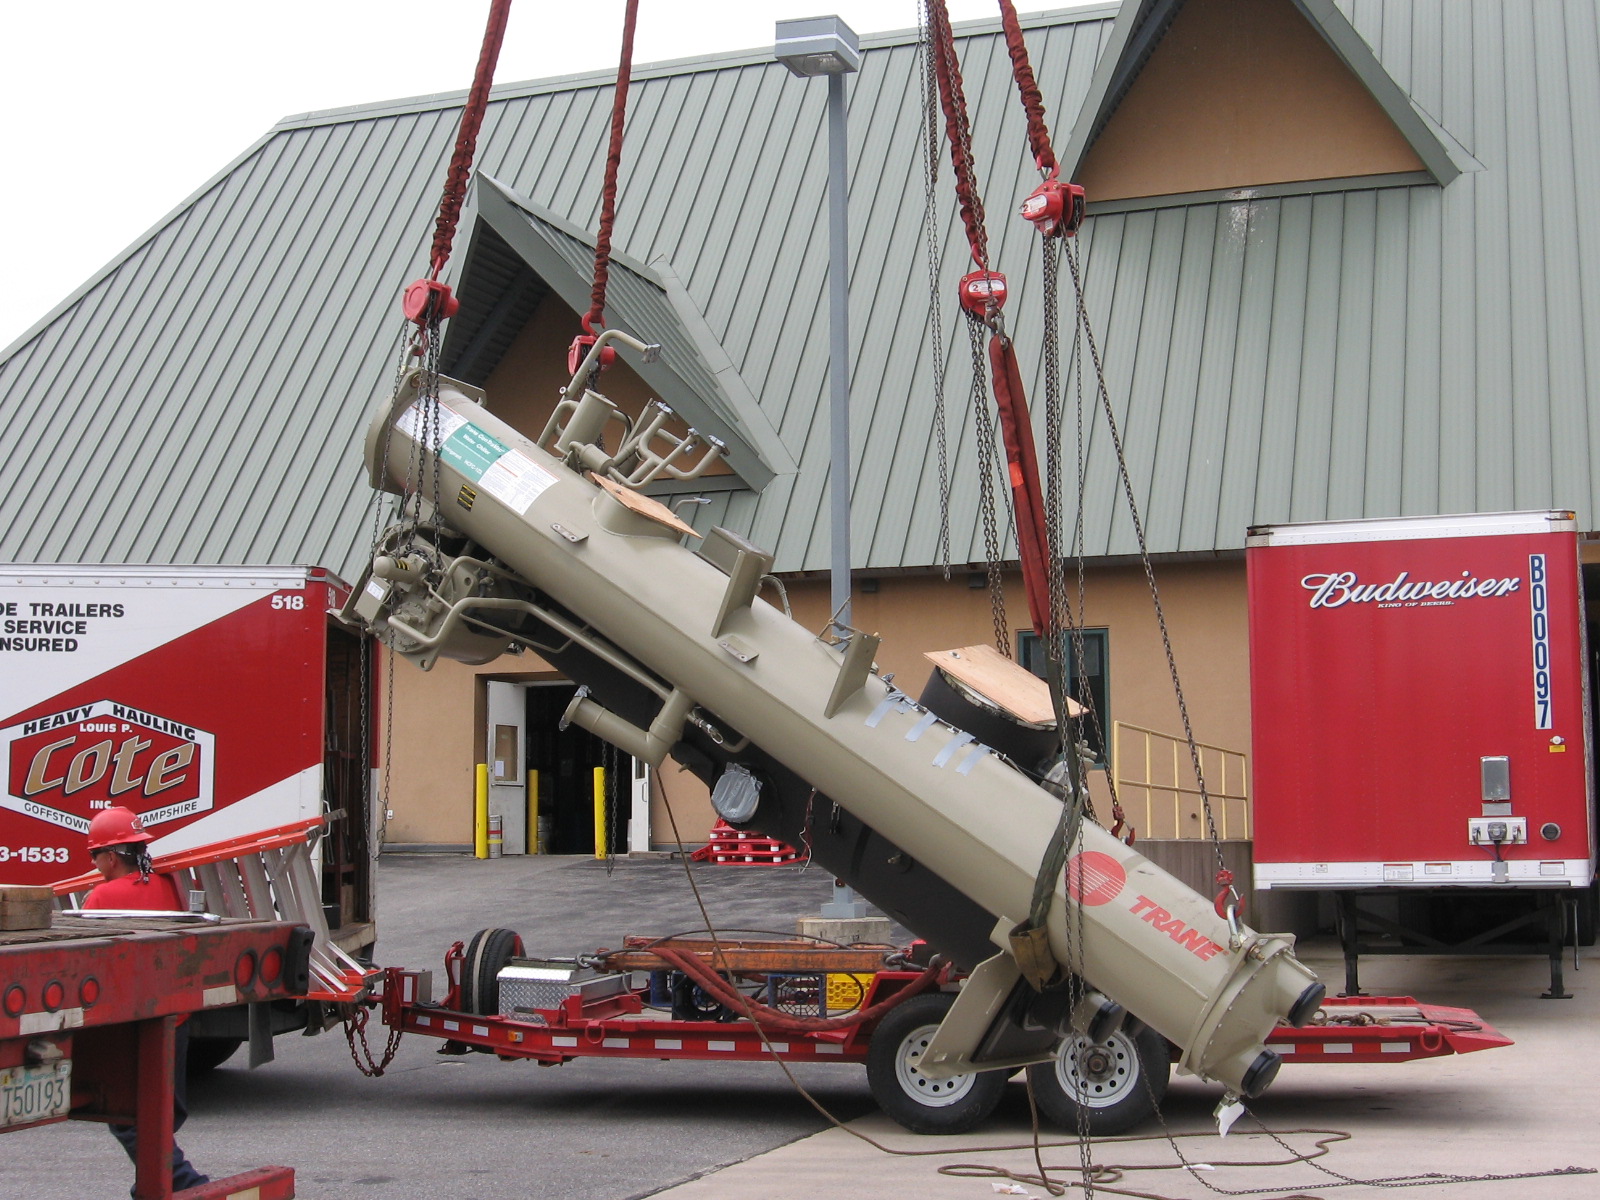 Louis P. Cote, Inc. uses a crane to lift heavy equipment off one of it's flatbed trailers after transport.